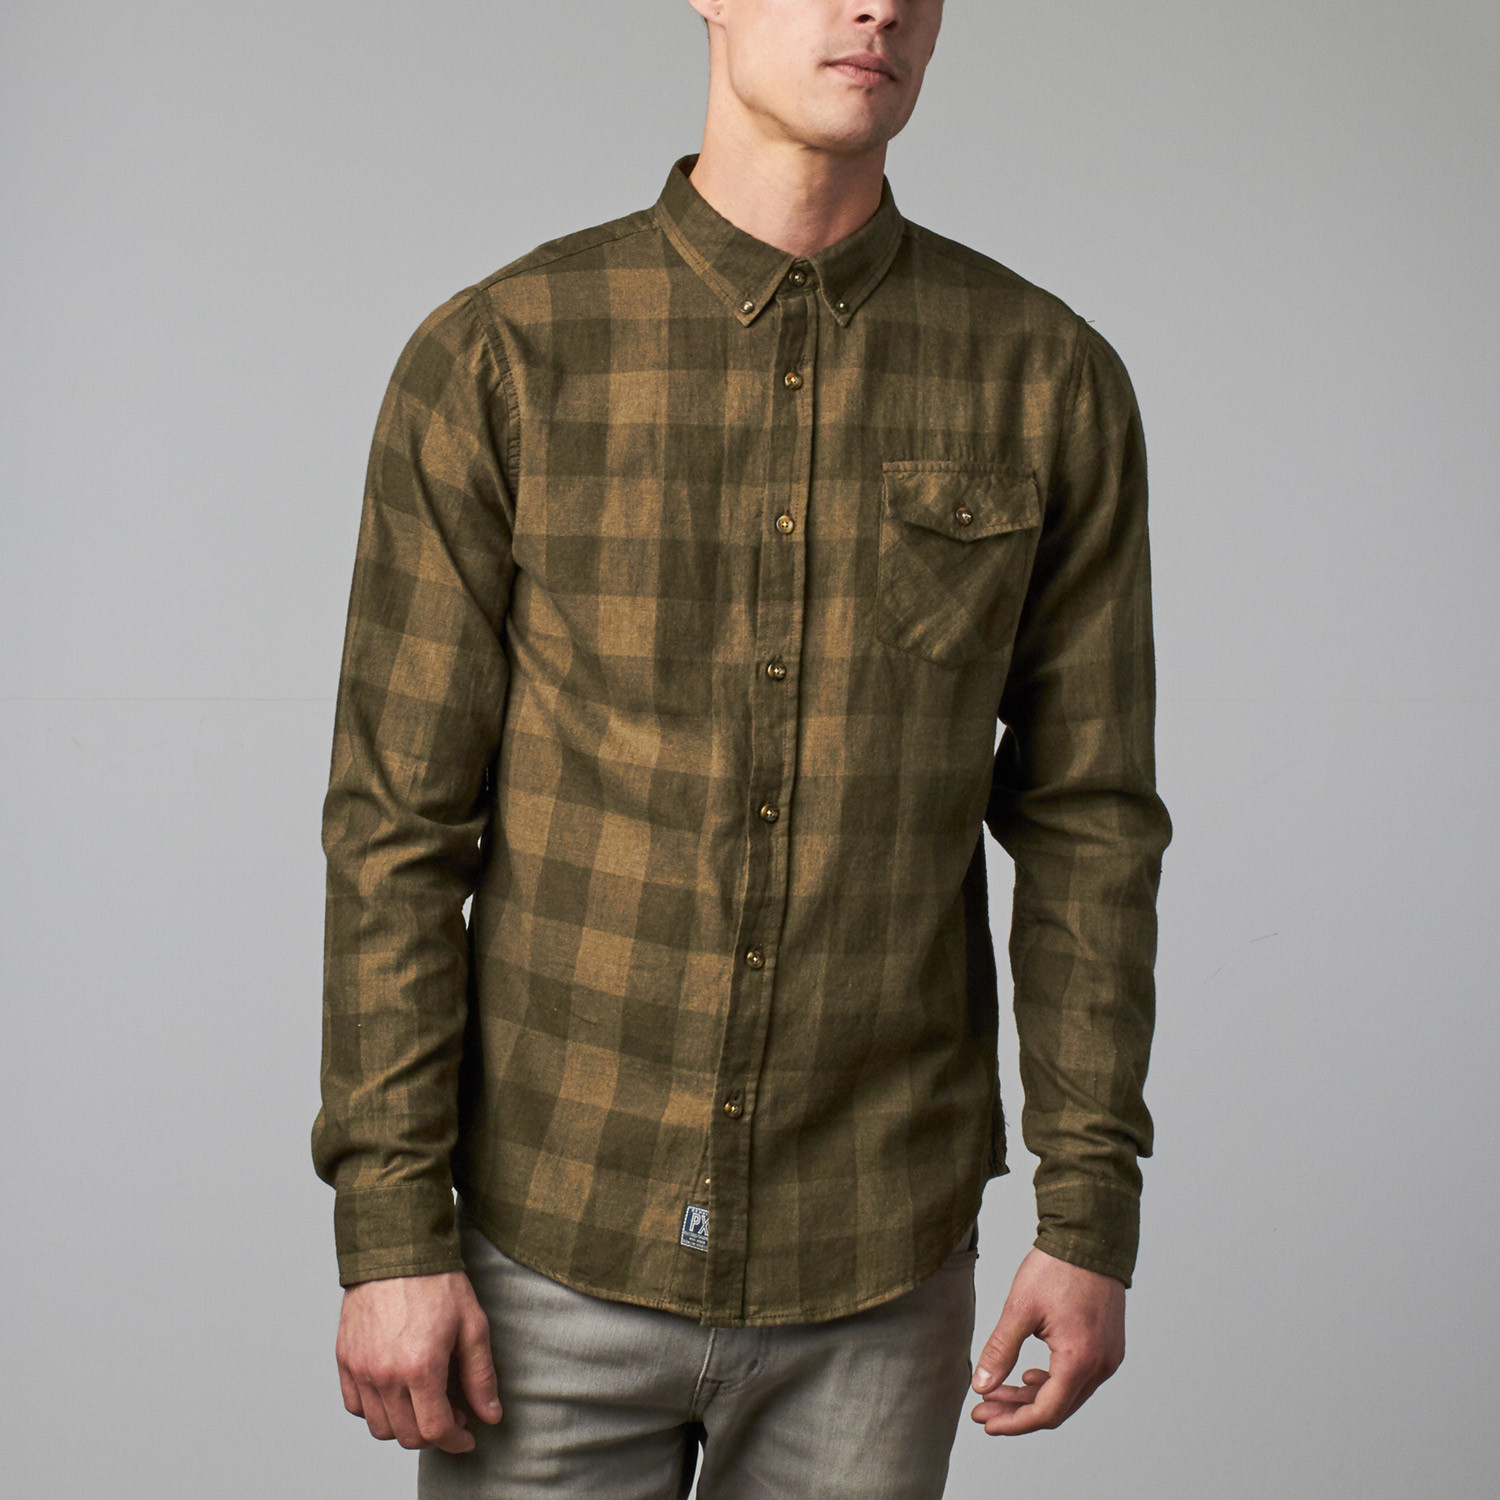 shirt with olive chinos